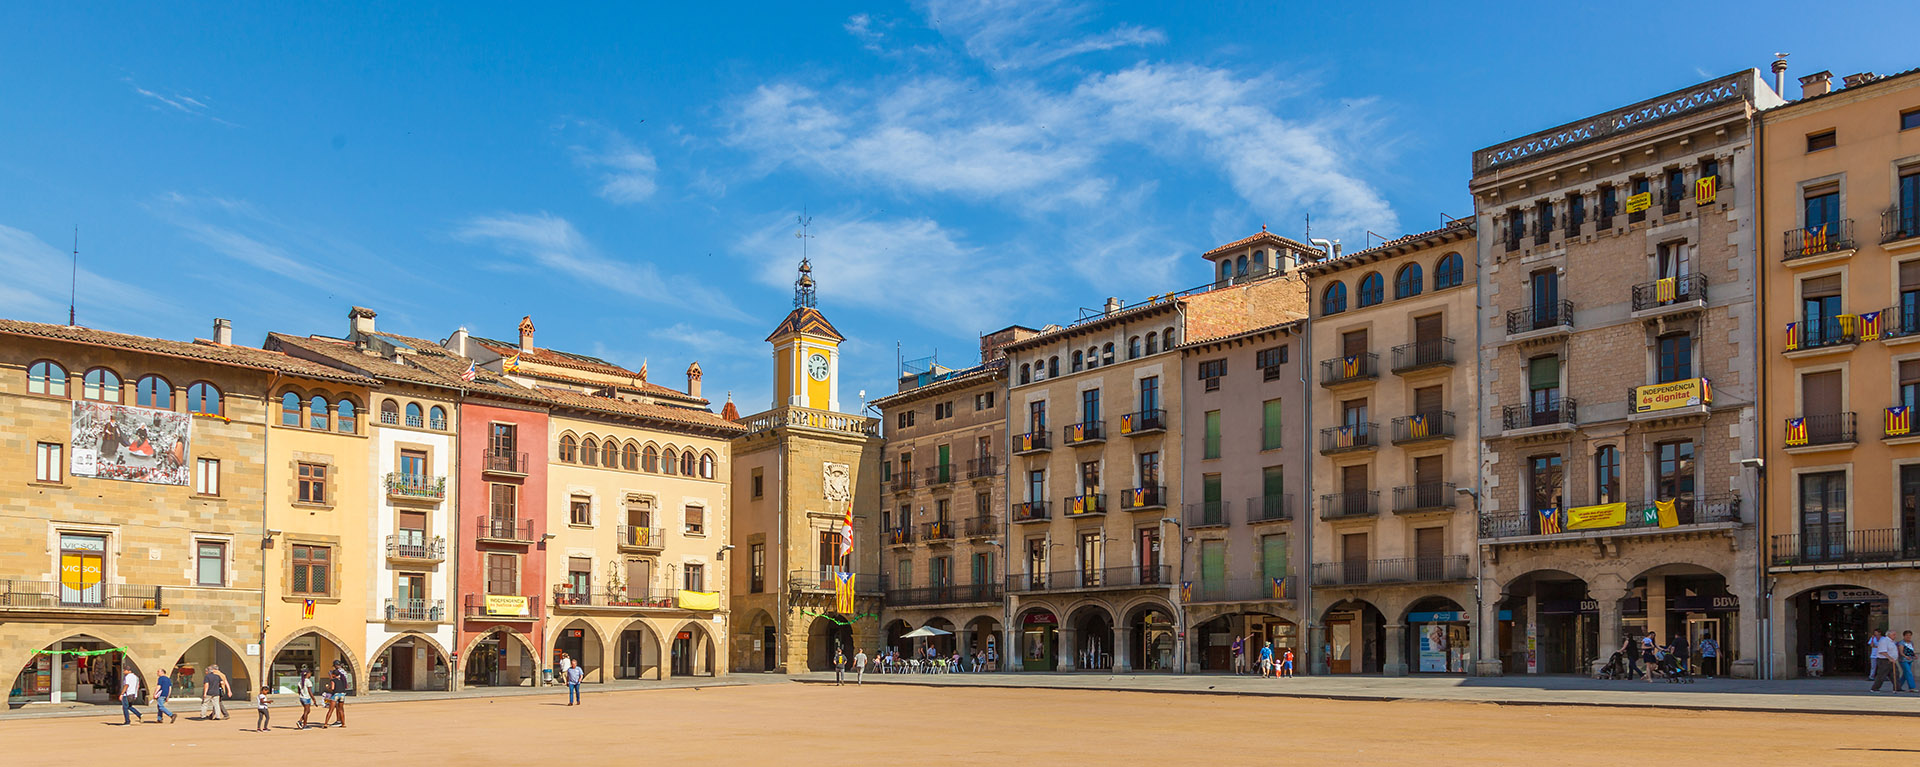 main square of Vic, Spain